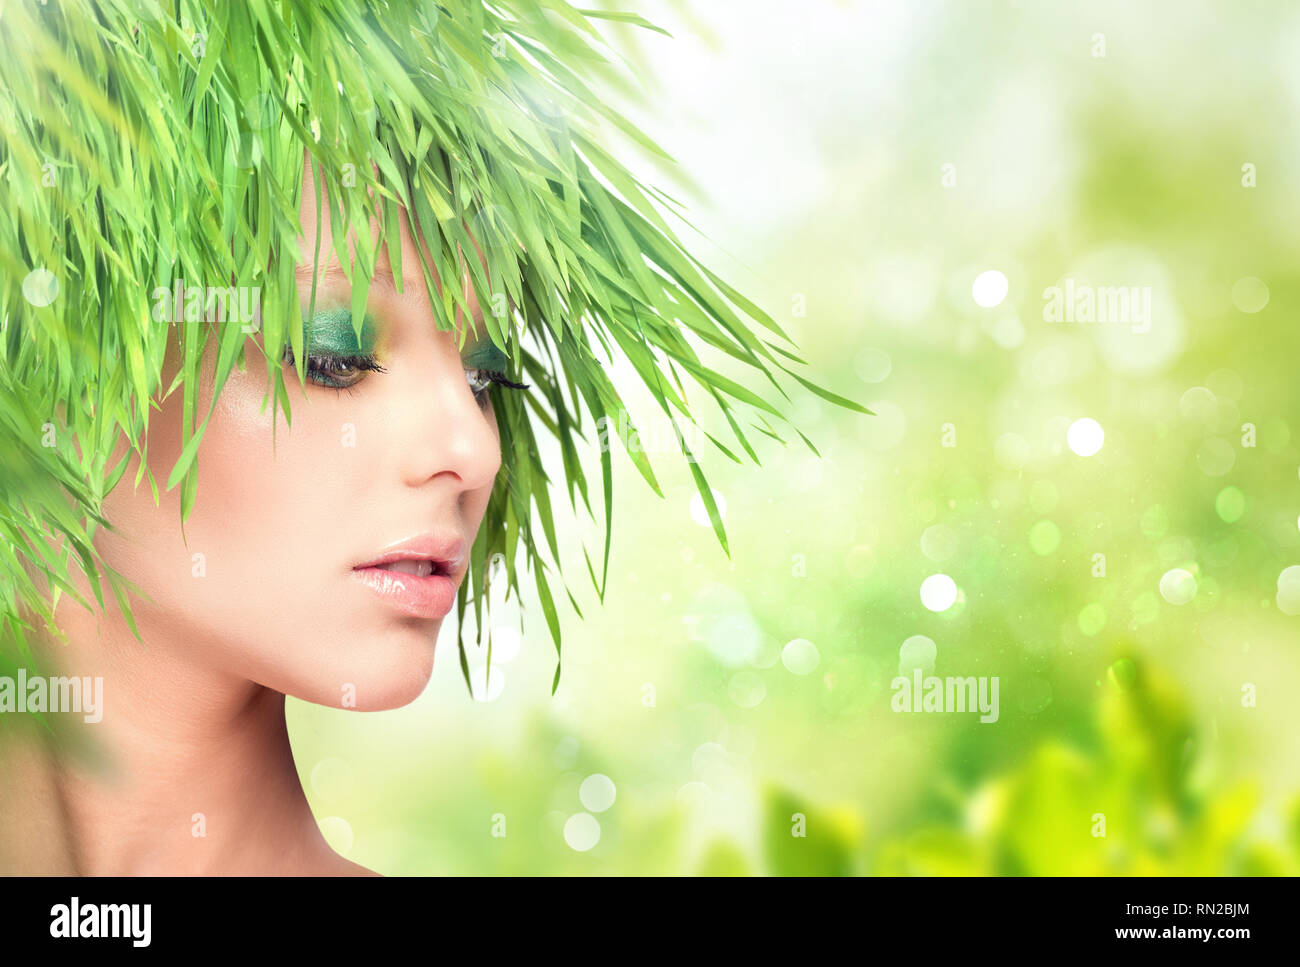 Nature beauty woman with fresh grass hair Stock Photo